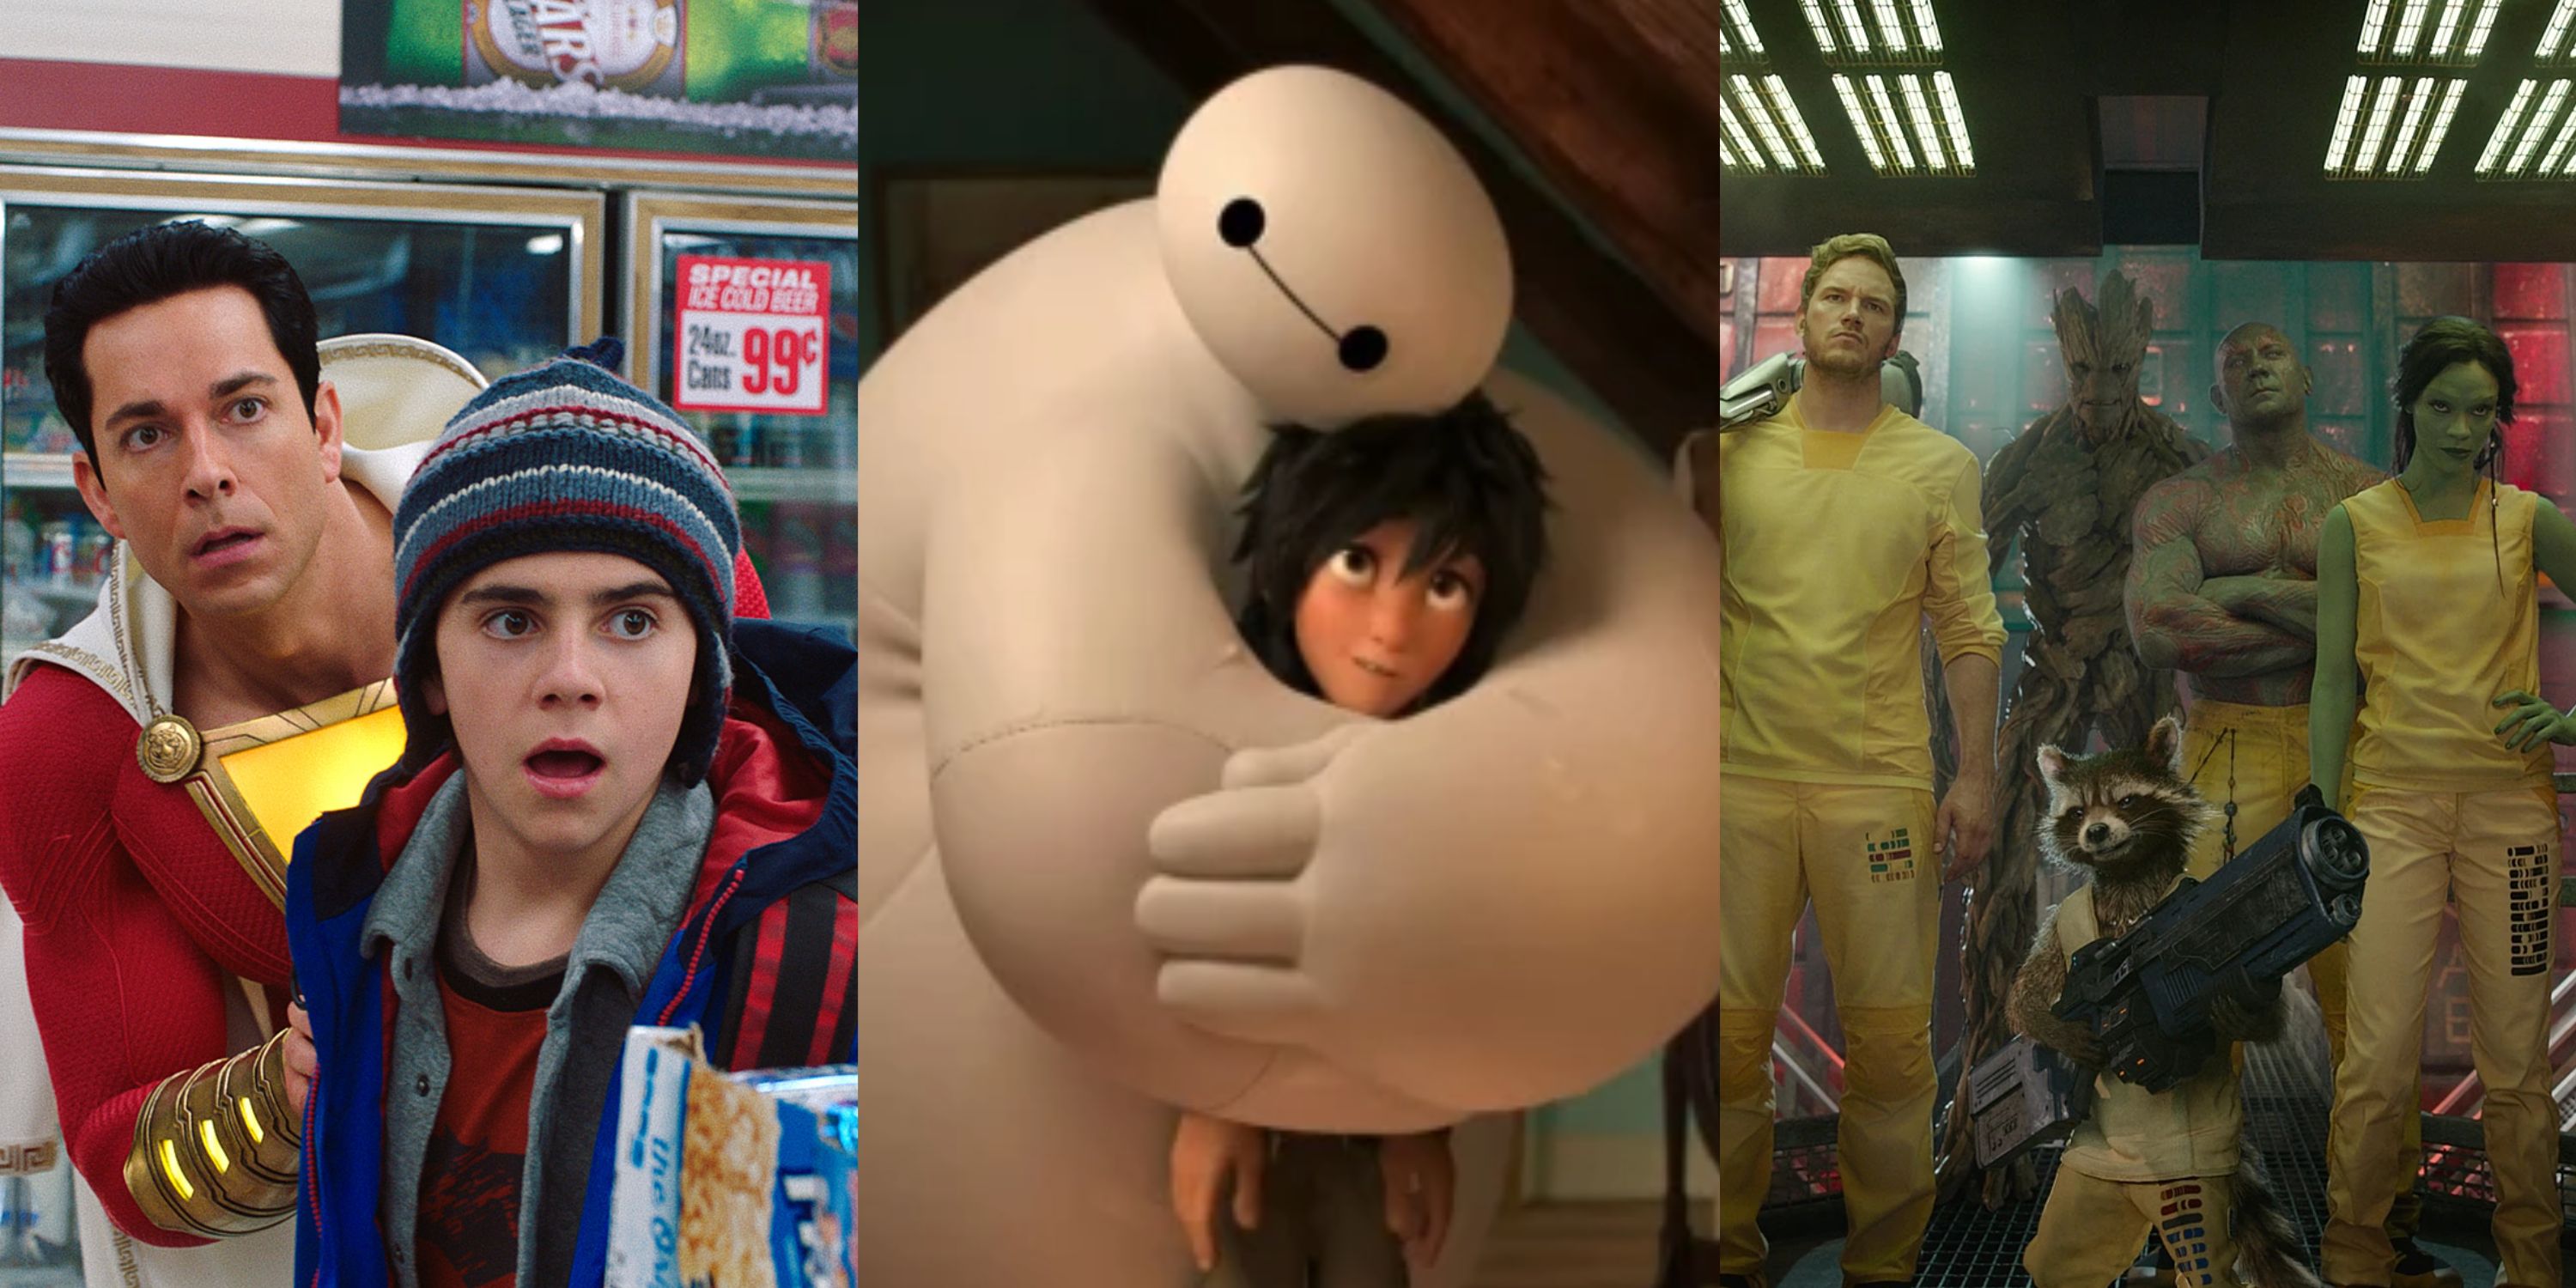 Split image of Shazam hiding behind Freddy, Baymax hugging Hiro, and the Guardians in jail holding weapons